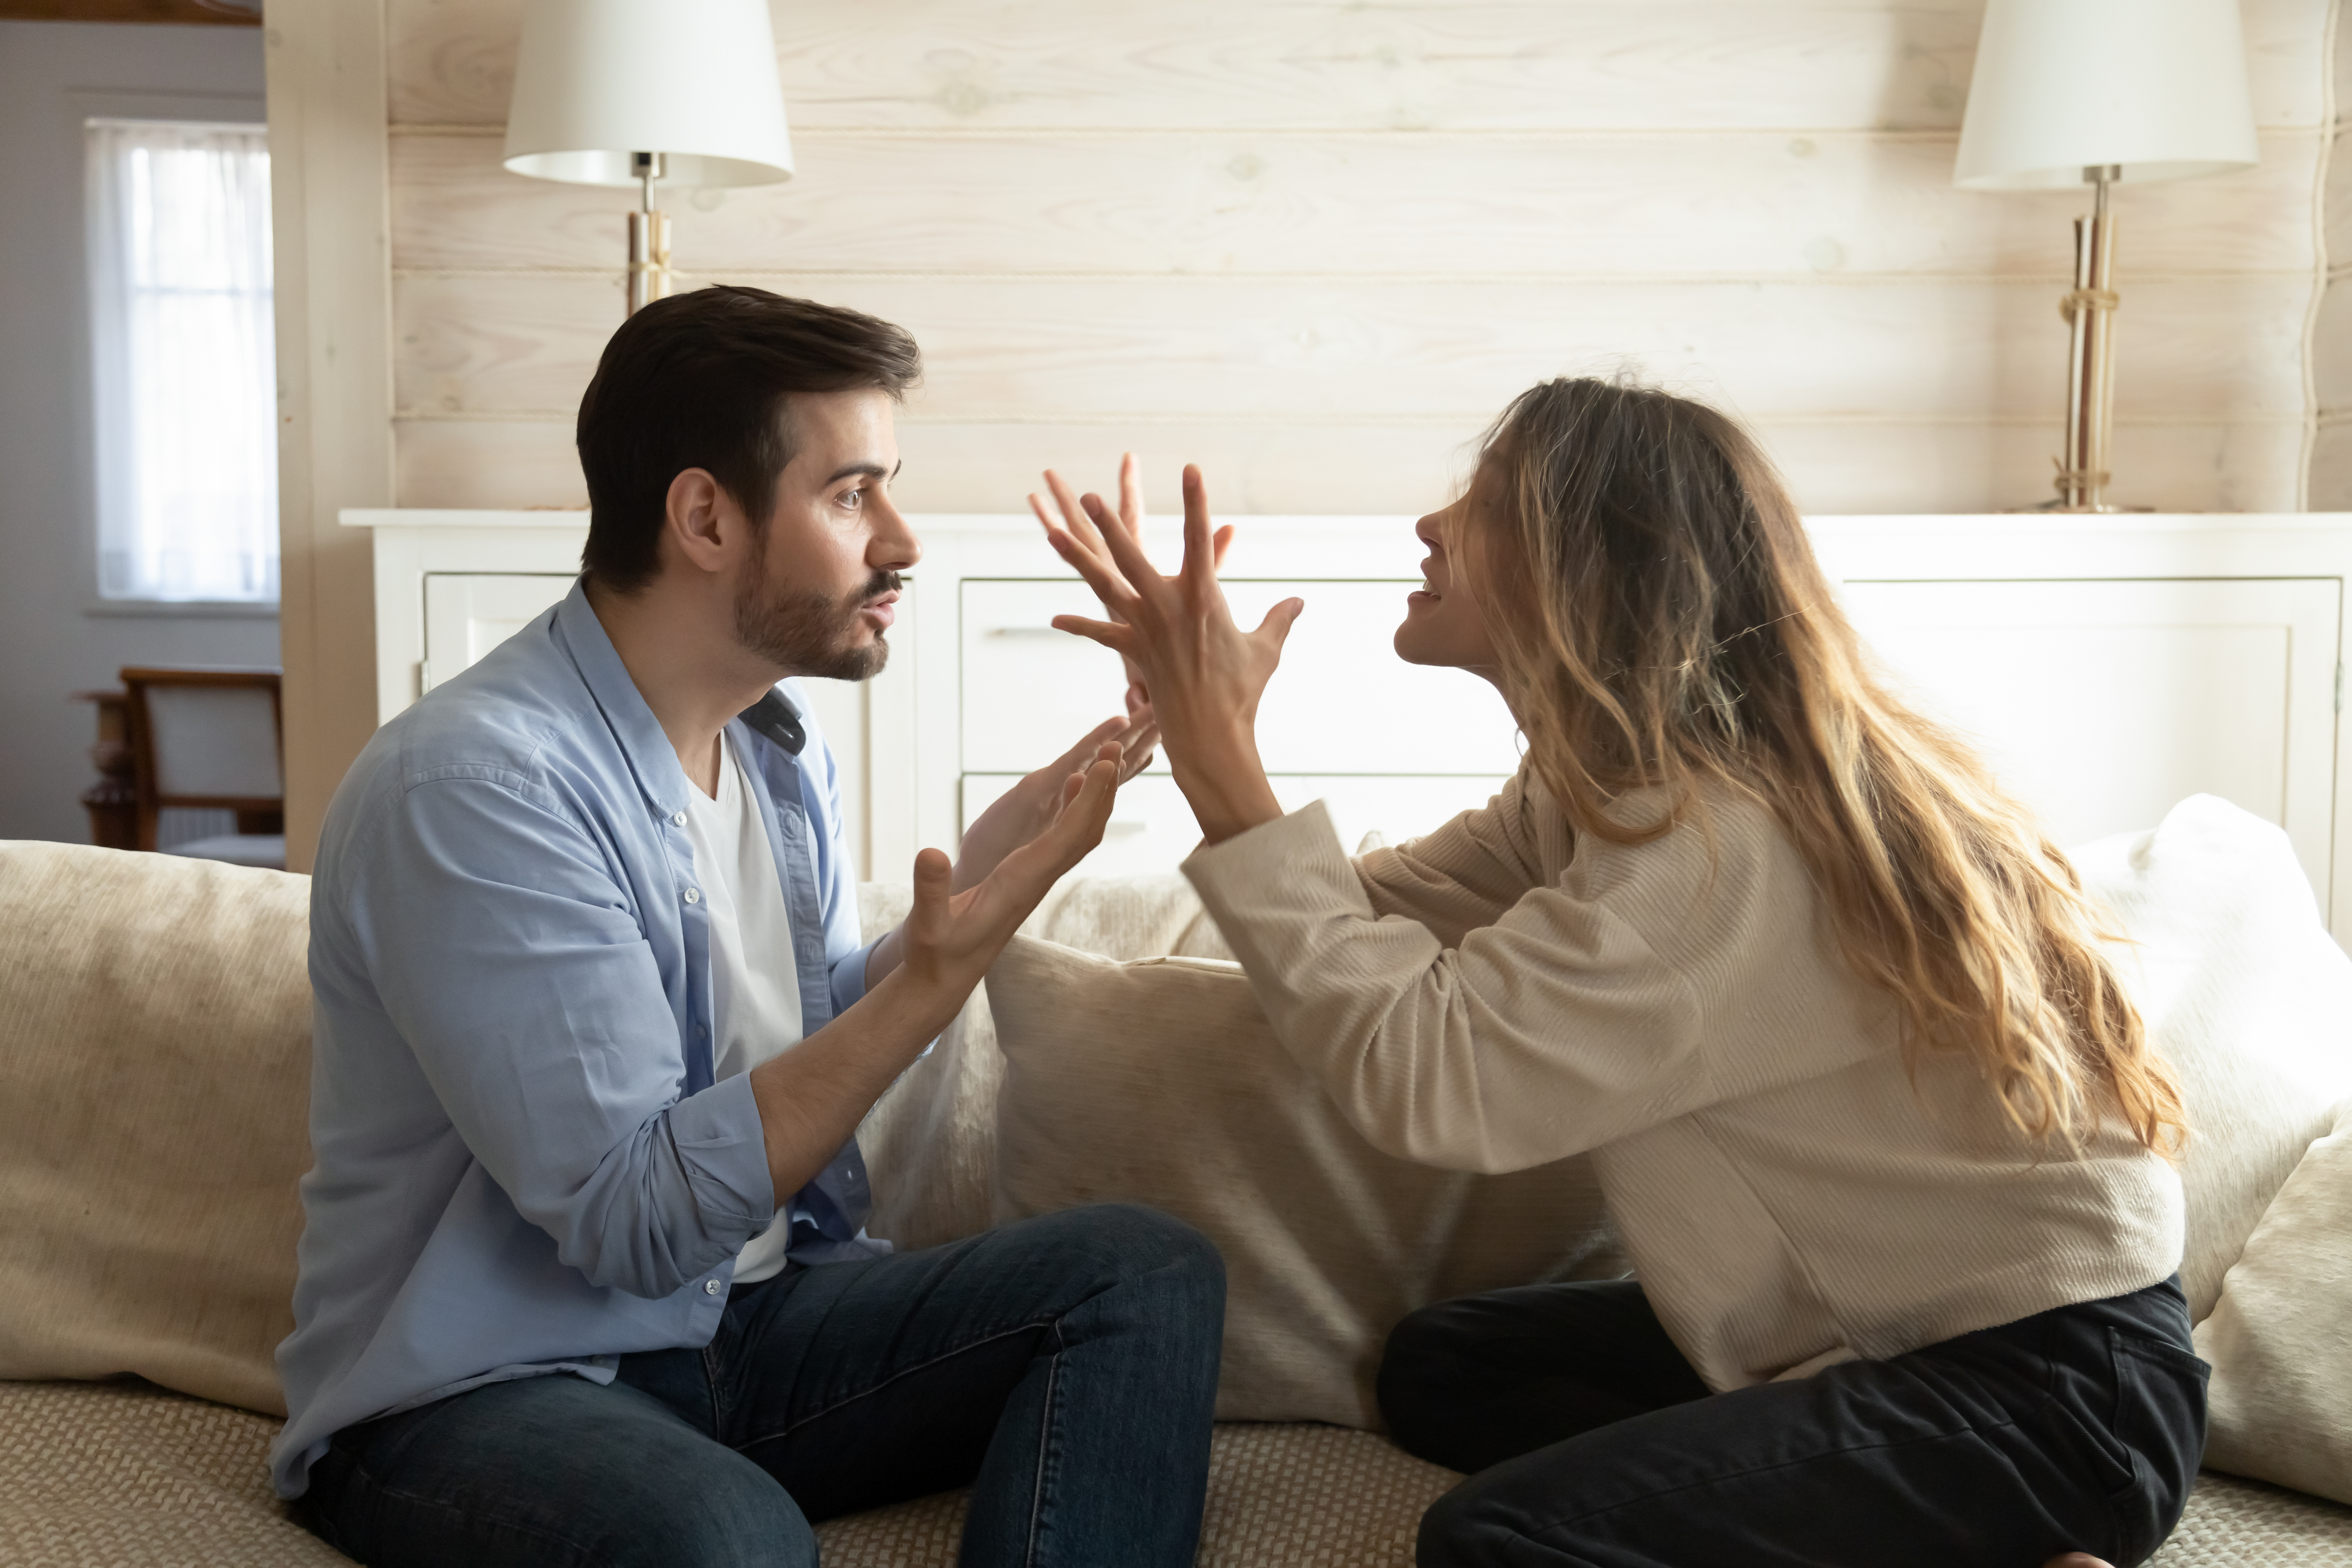 Emotional annoyed stressed couple | Source: Shutterstock